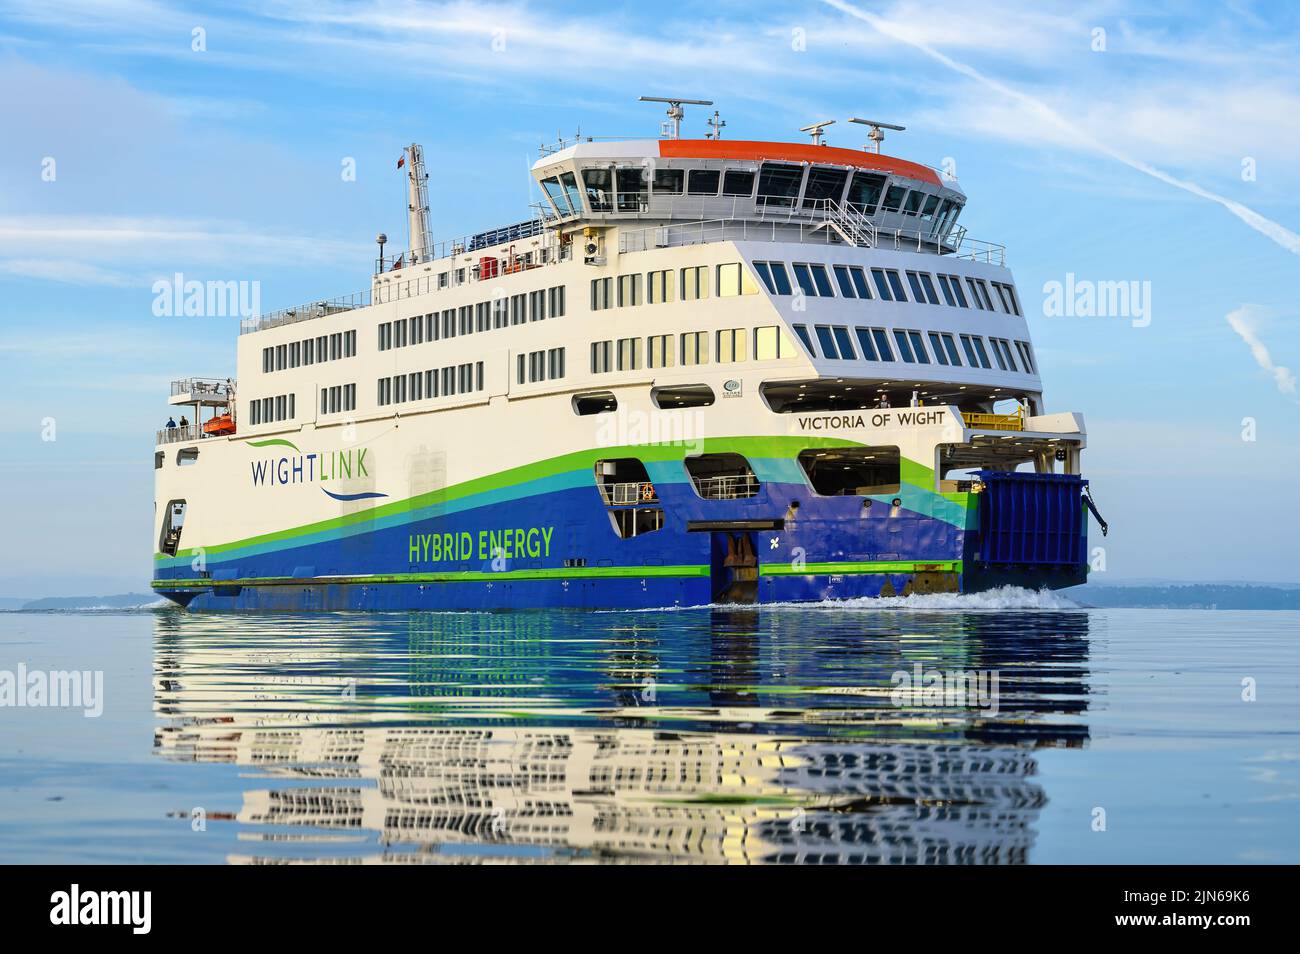 Victoria of Wight is operated by Wightlink on passenger services across the Solent between Portsmouth and the Isle of Wight - July 2022. Stock Photo